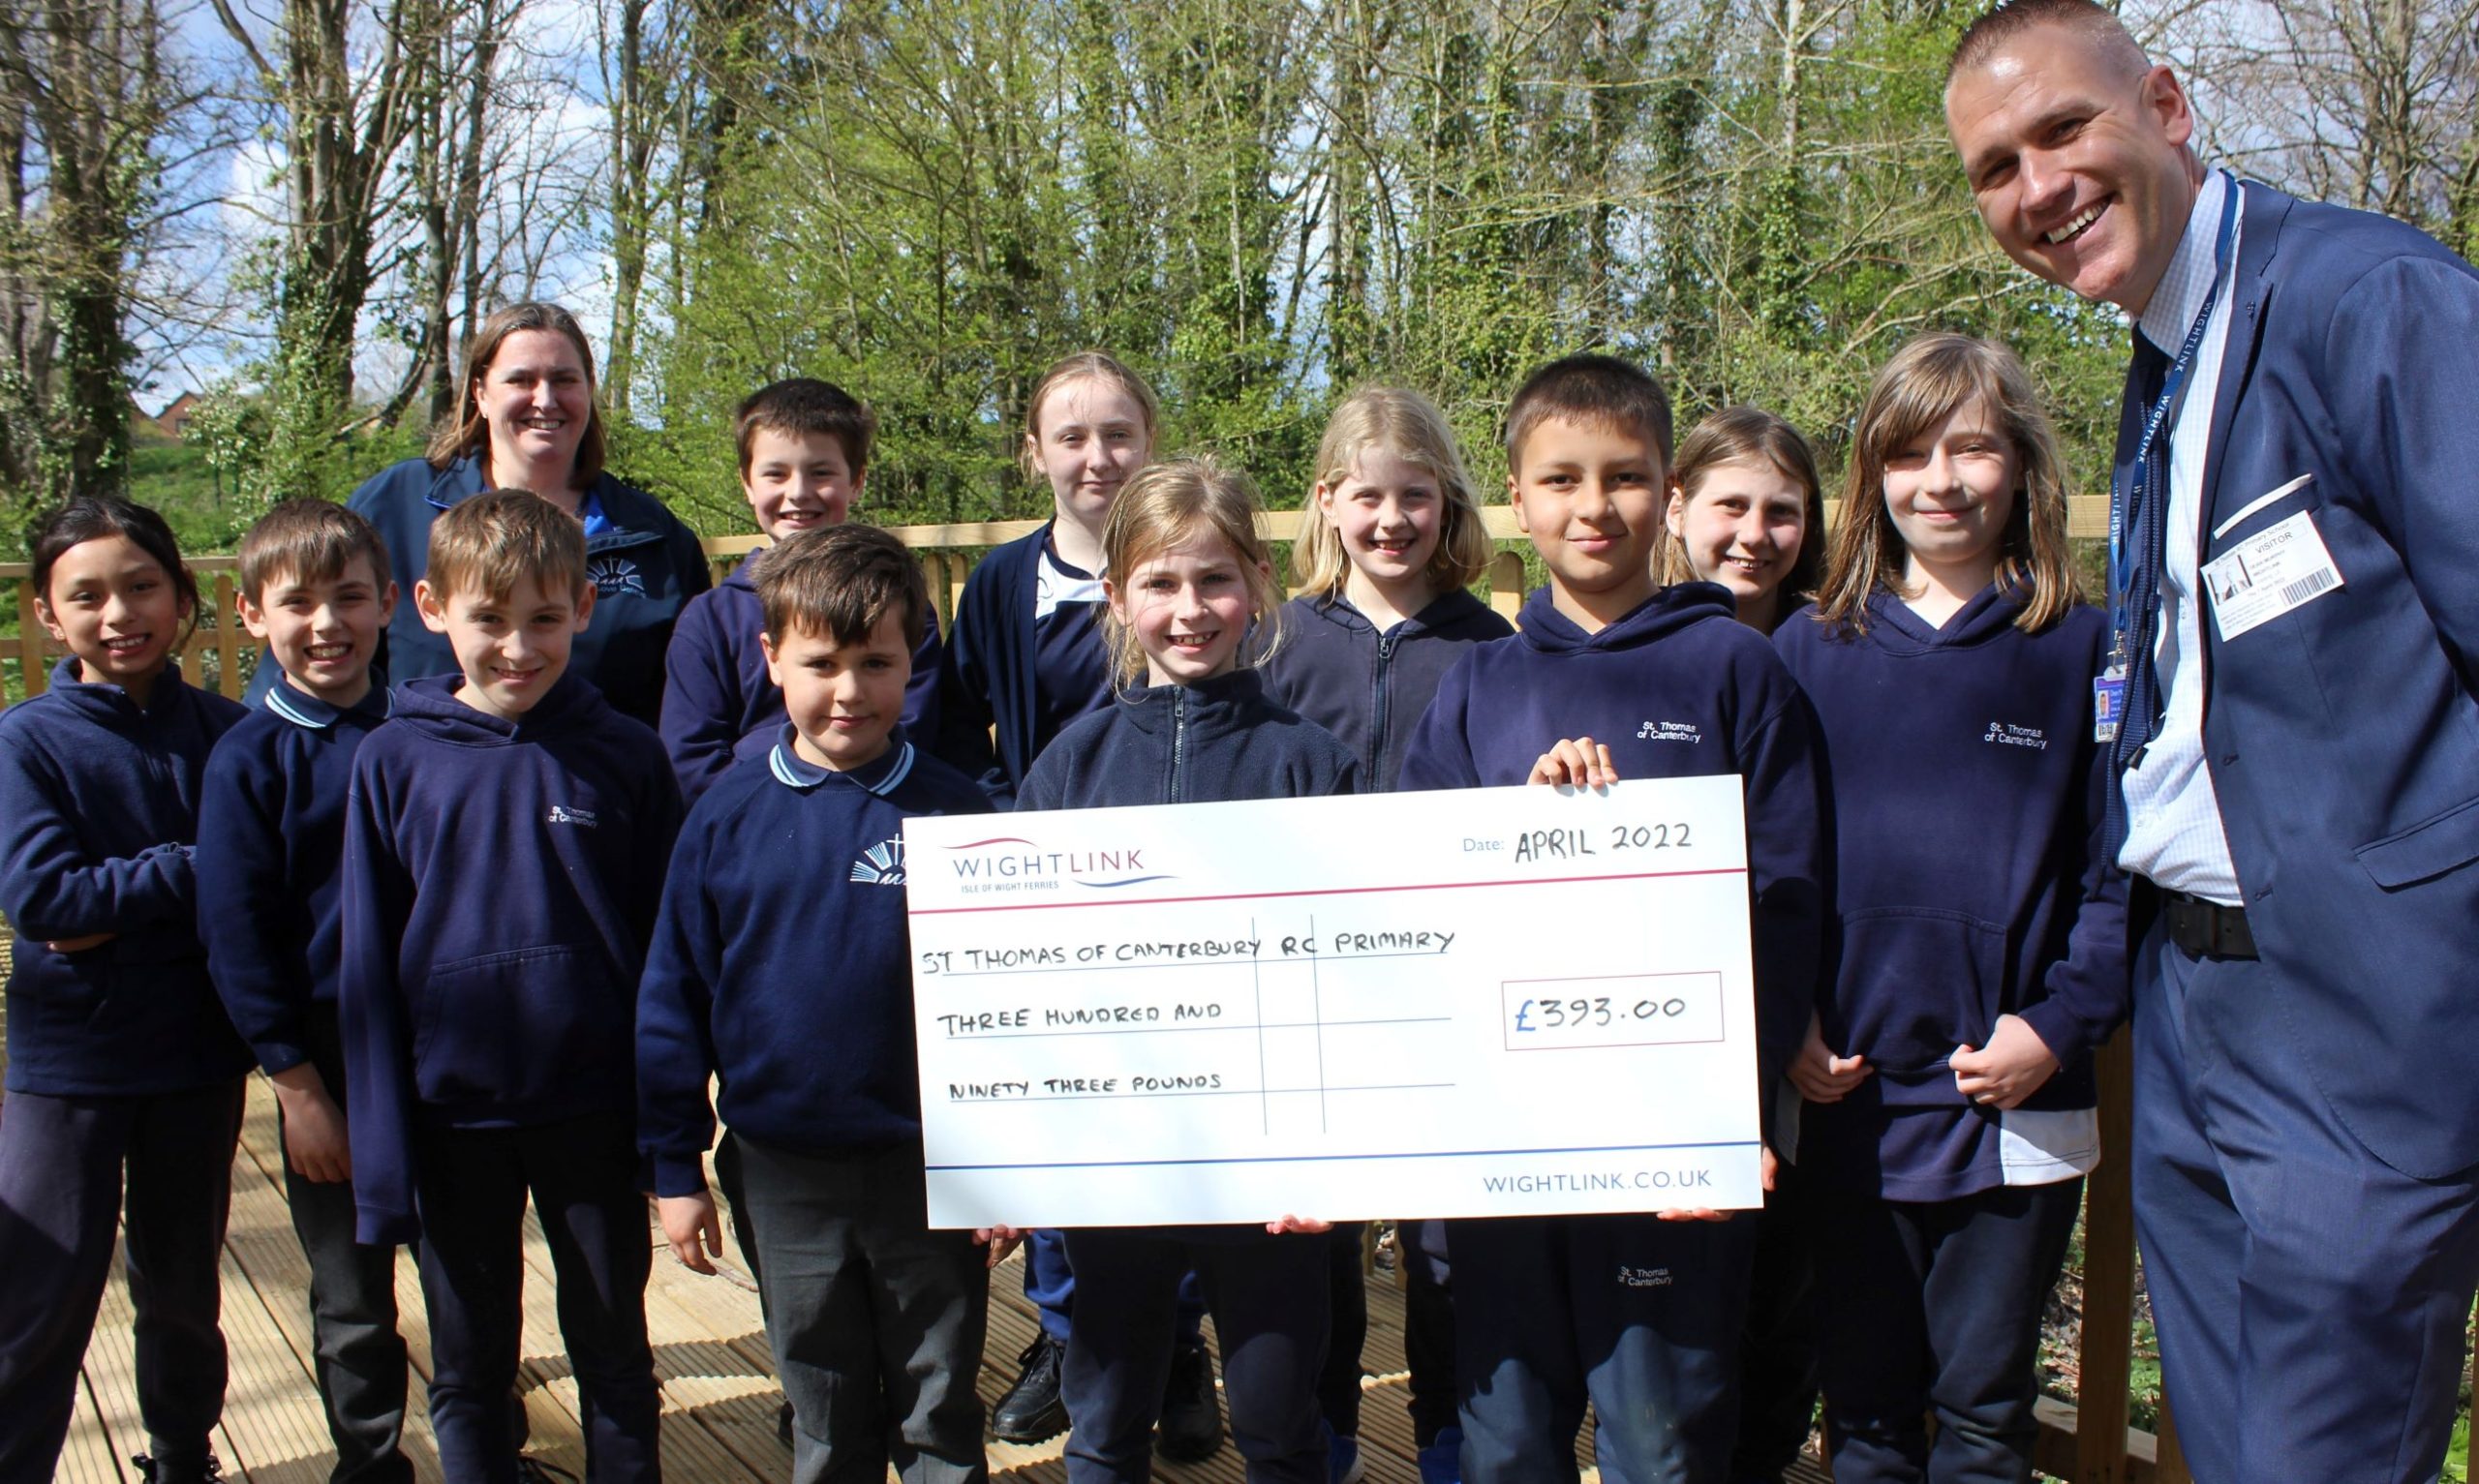 Pupils from St Thomas of Canterbury School on the Isle of Wight being presented with a giant grant cheque